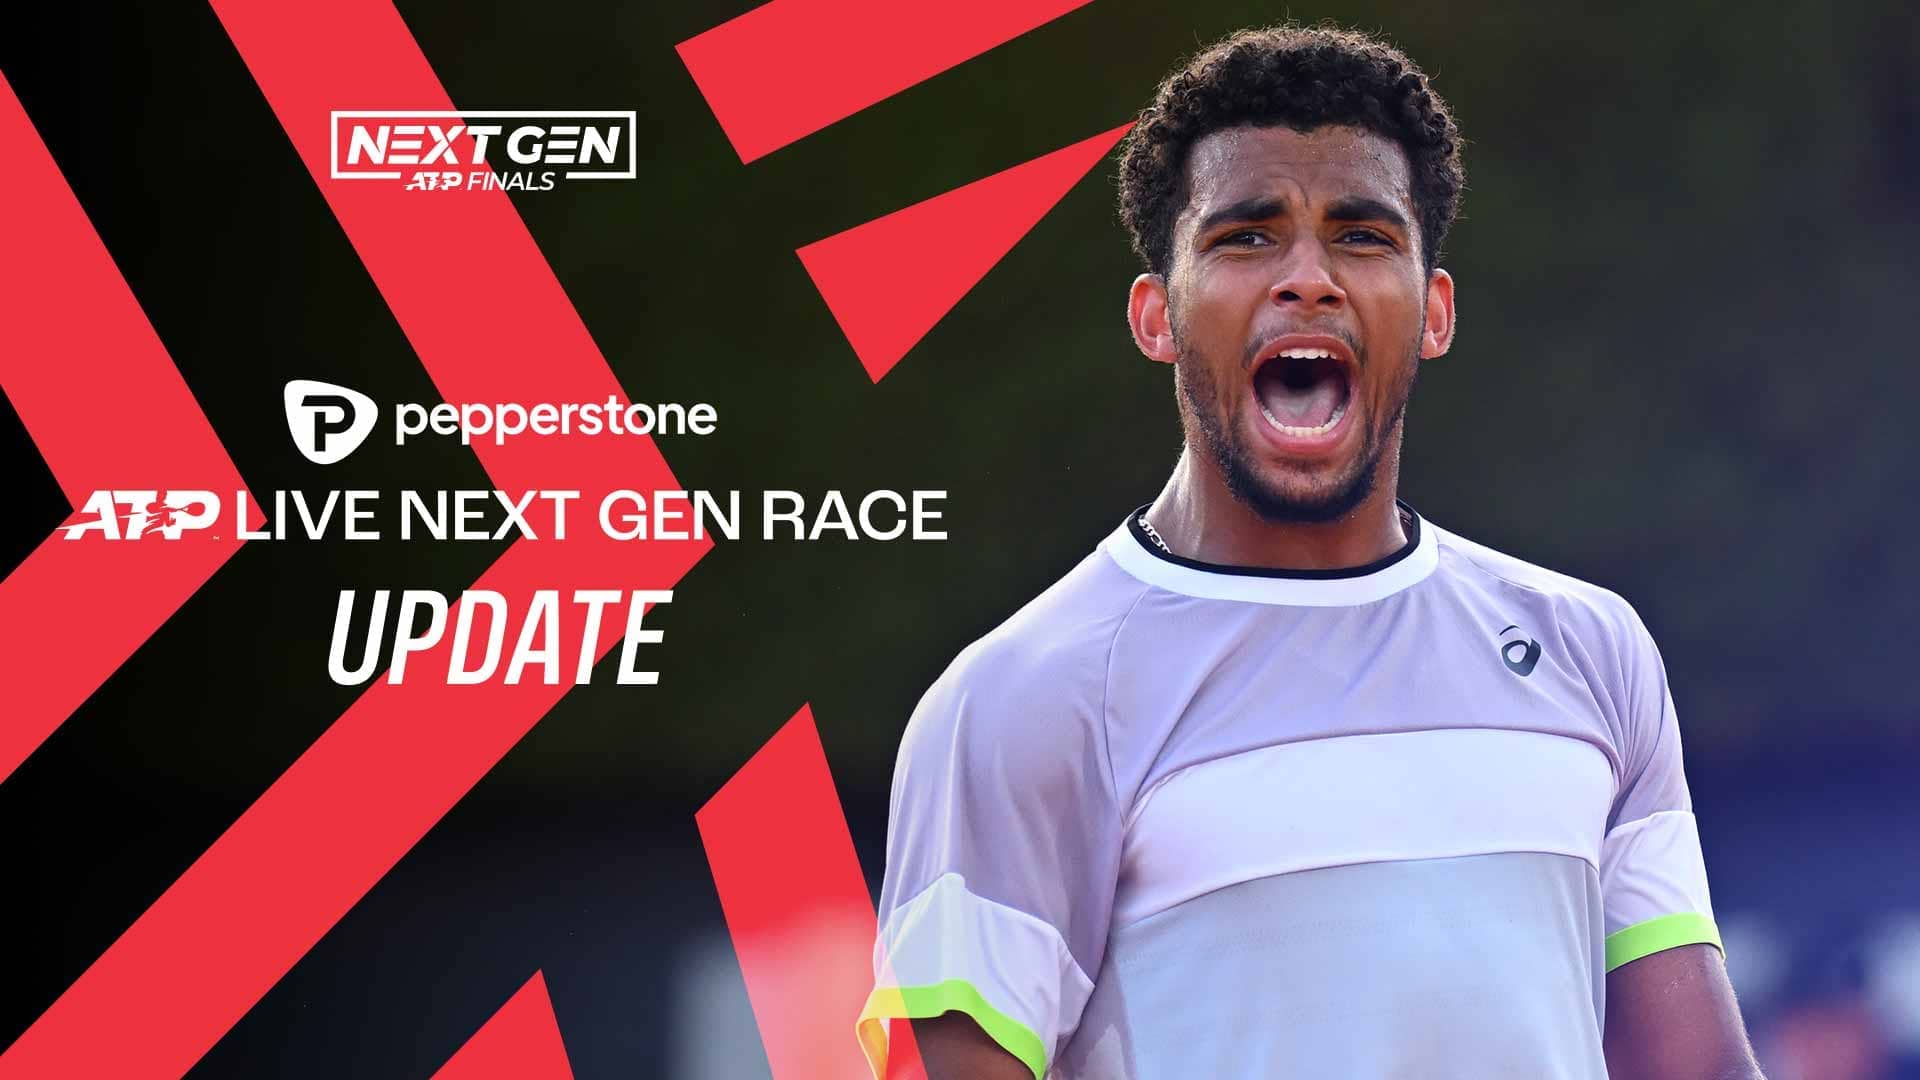 Arthur Fils is currently fifth in the Pepperstone ATP Live Next Gen Race.